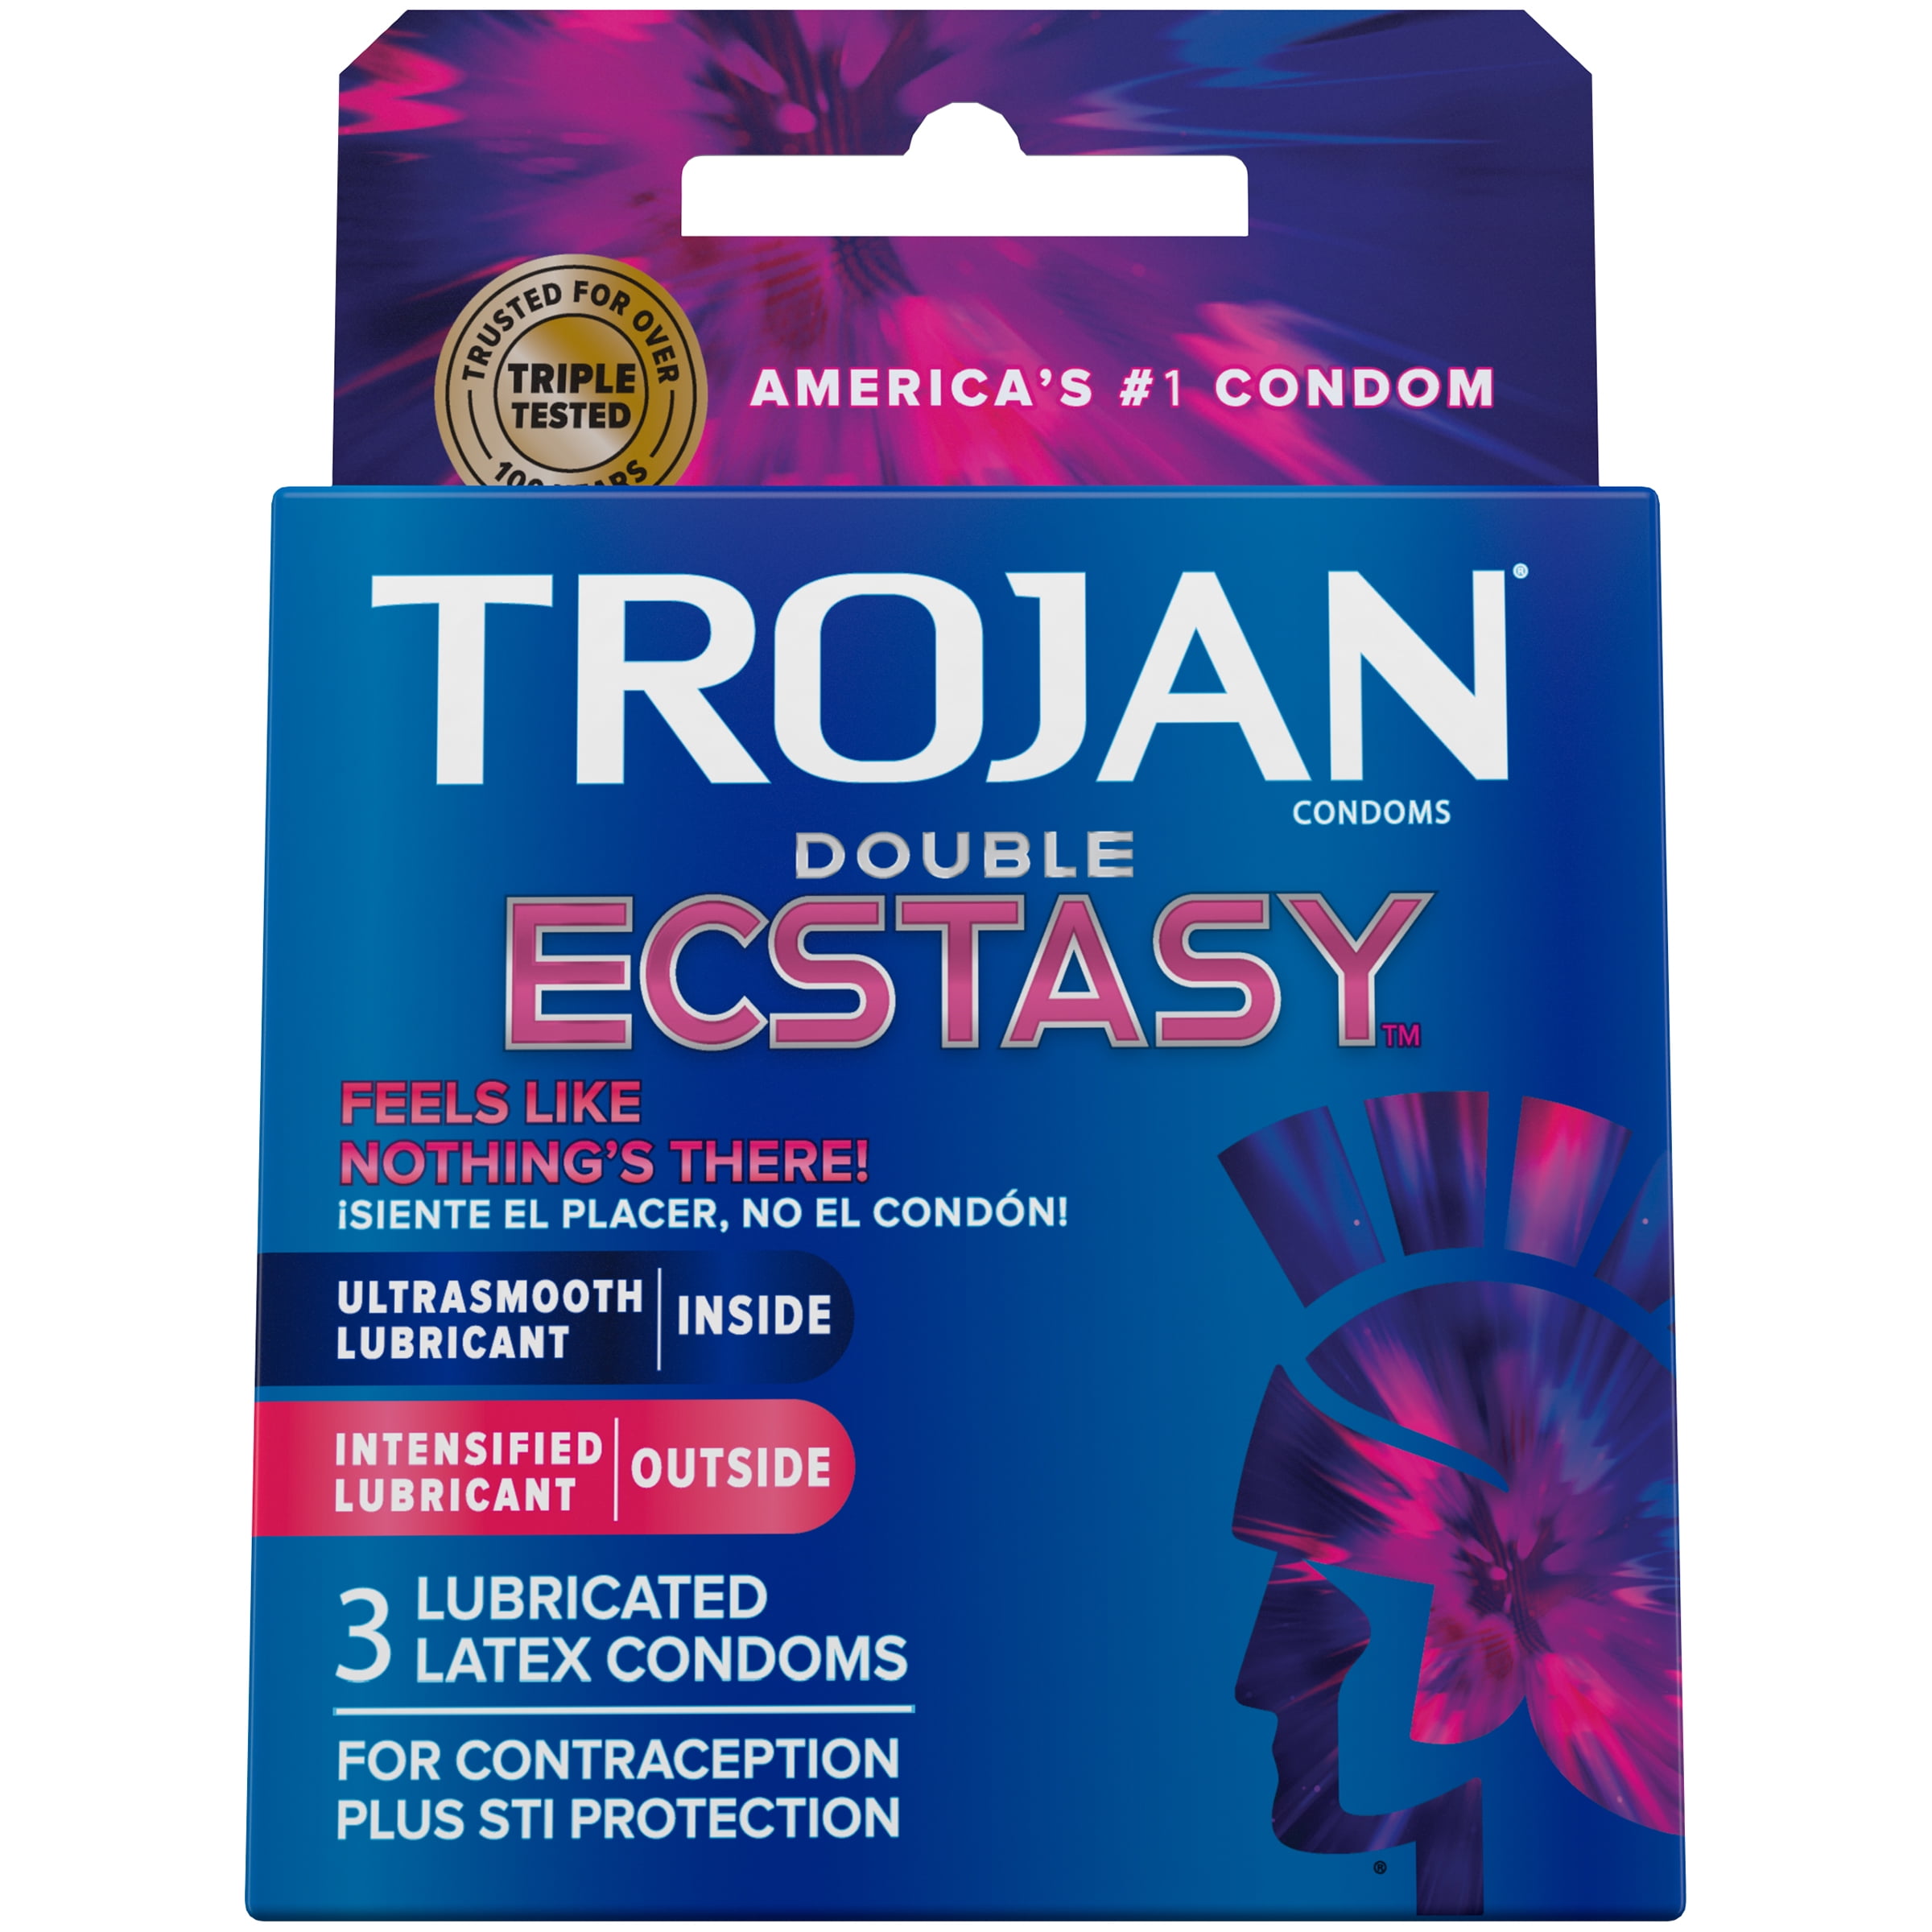 Product Of Trojan, Double Ecstasy Intensified Lubricant, Count 6 (3Pk) -  Birth Control / Grab Varieties & Flavors